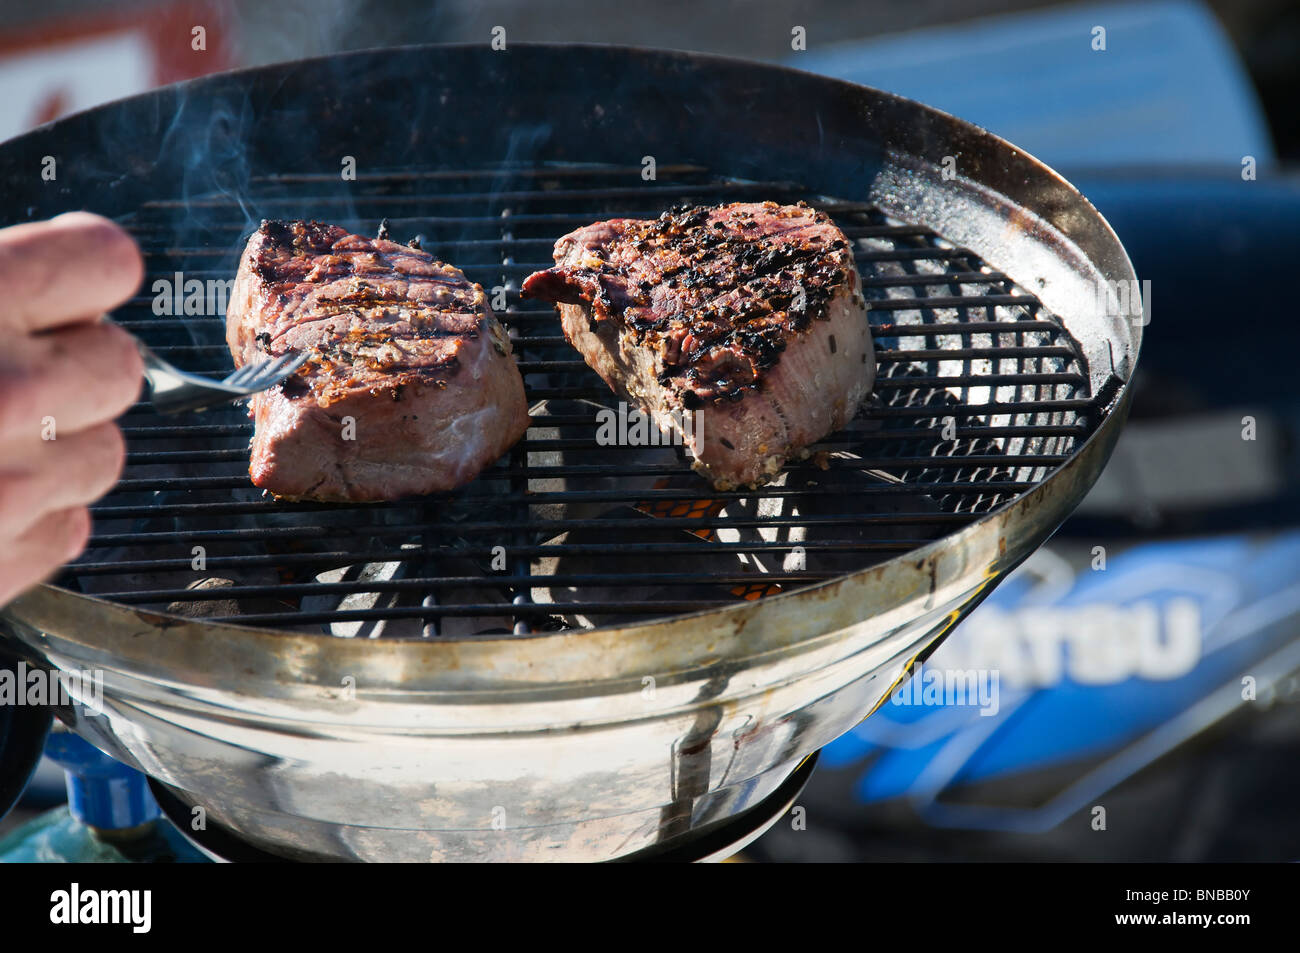 Two filet mignon steaks are being grilled on a round outdoor barbecue on the back of a boat. Stock Photo